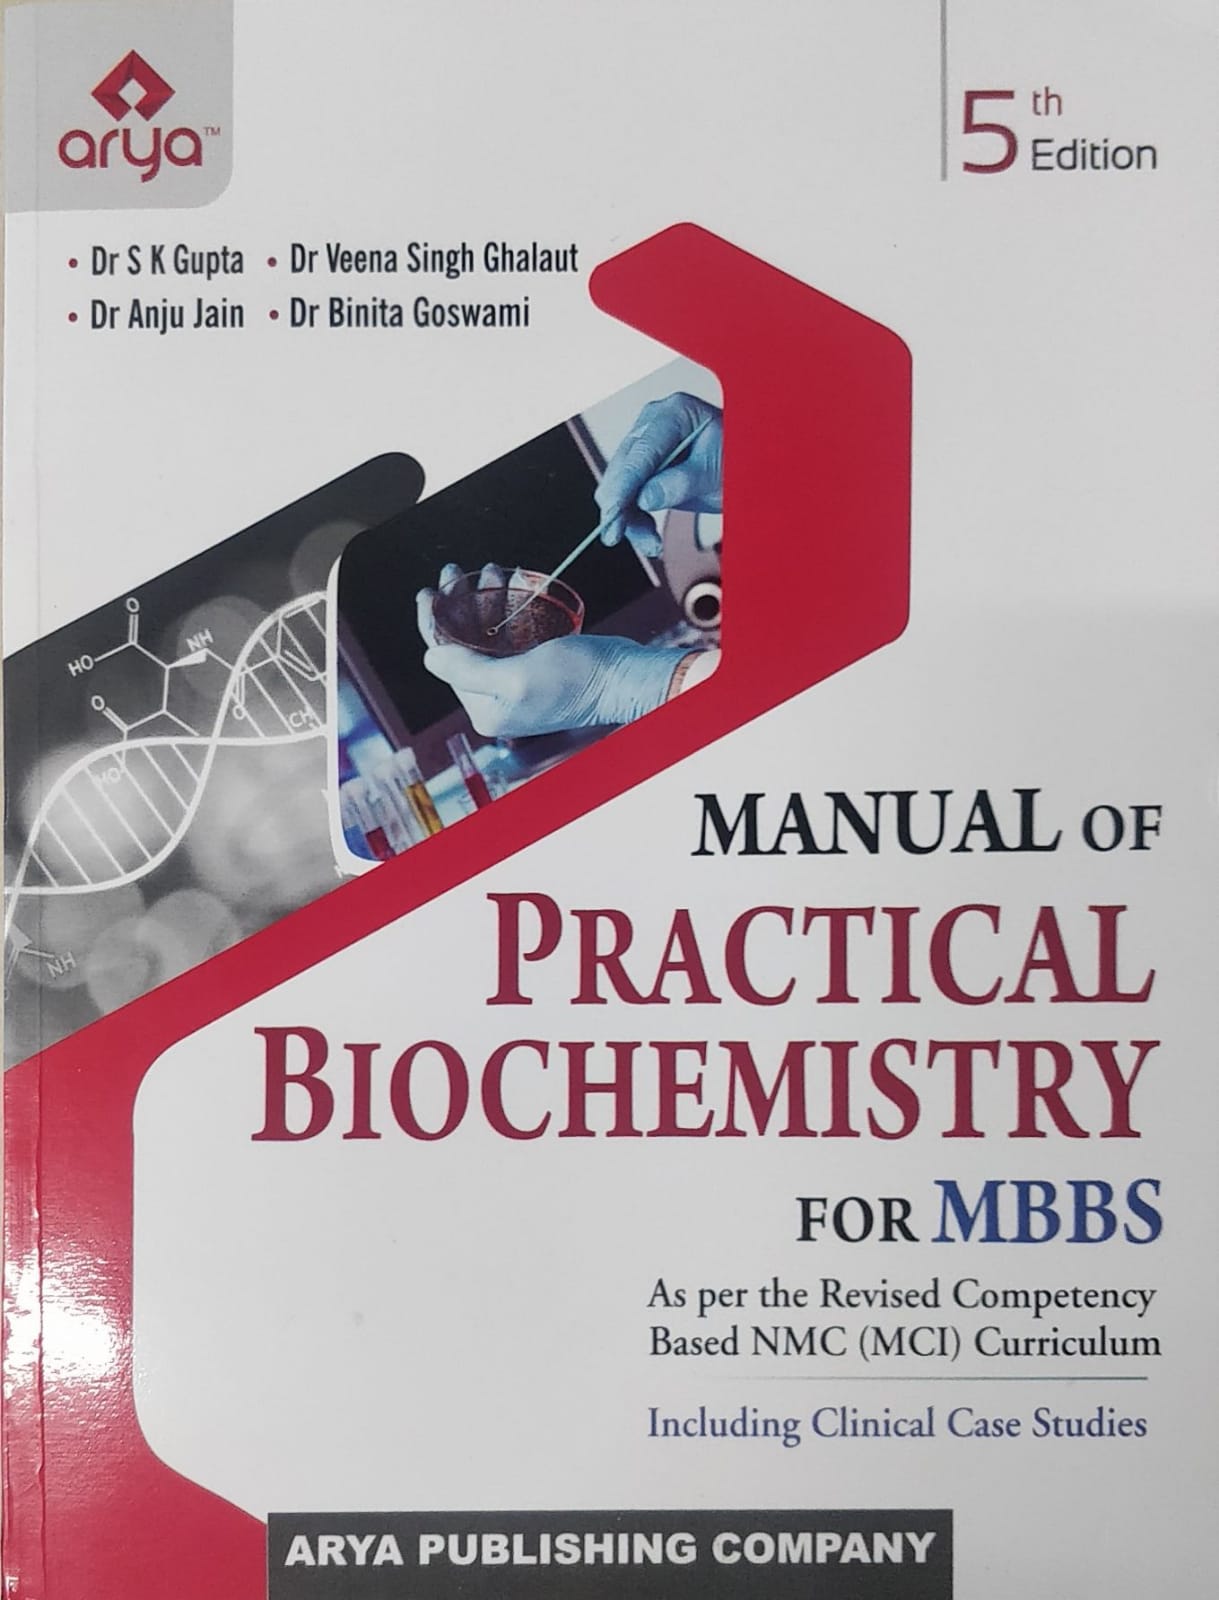 Manual Of Practical Biochemistry For MBBS 5th